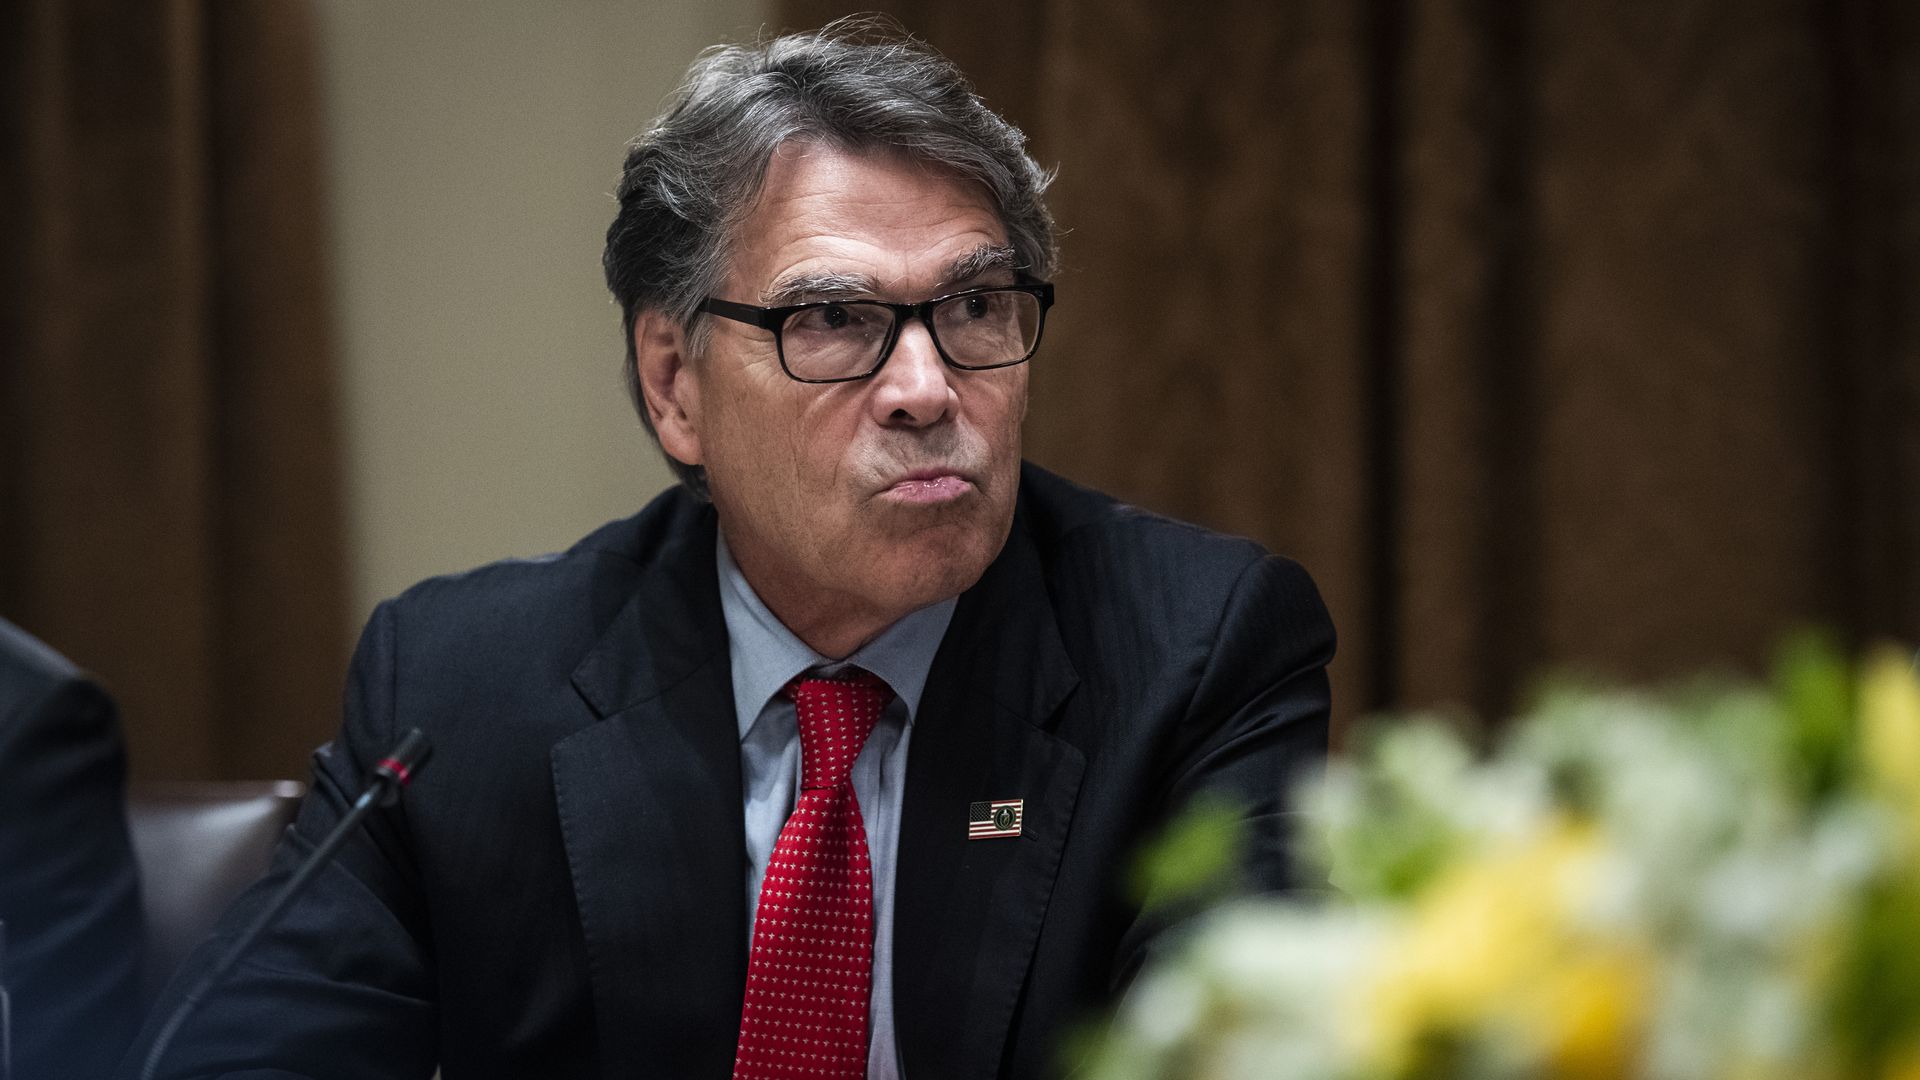 In this image, Rick Perry frowns and sits with his arms crossed while wearing a tie and glasses.